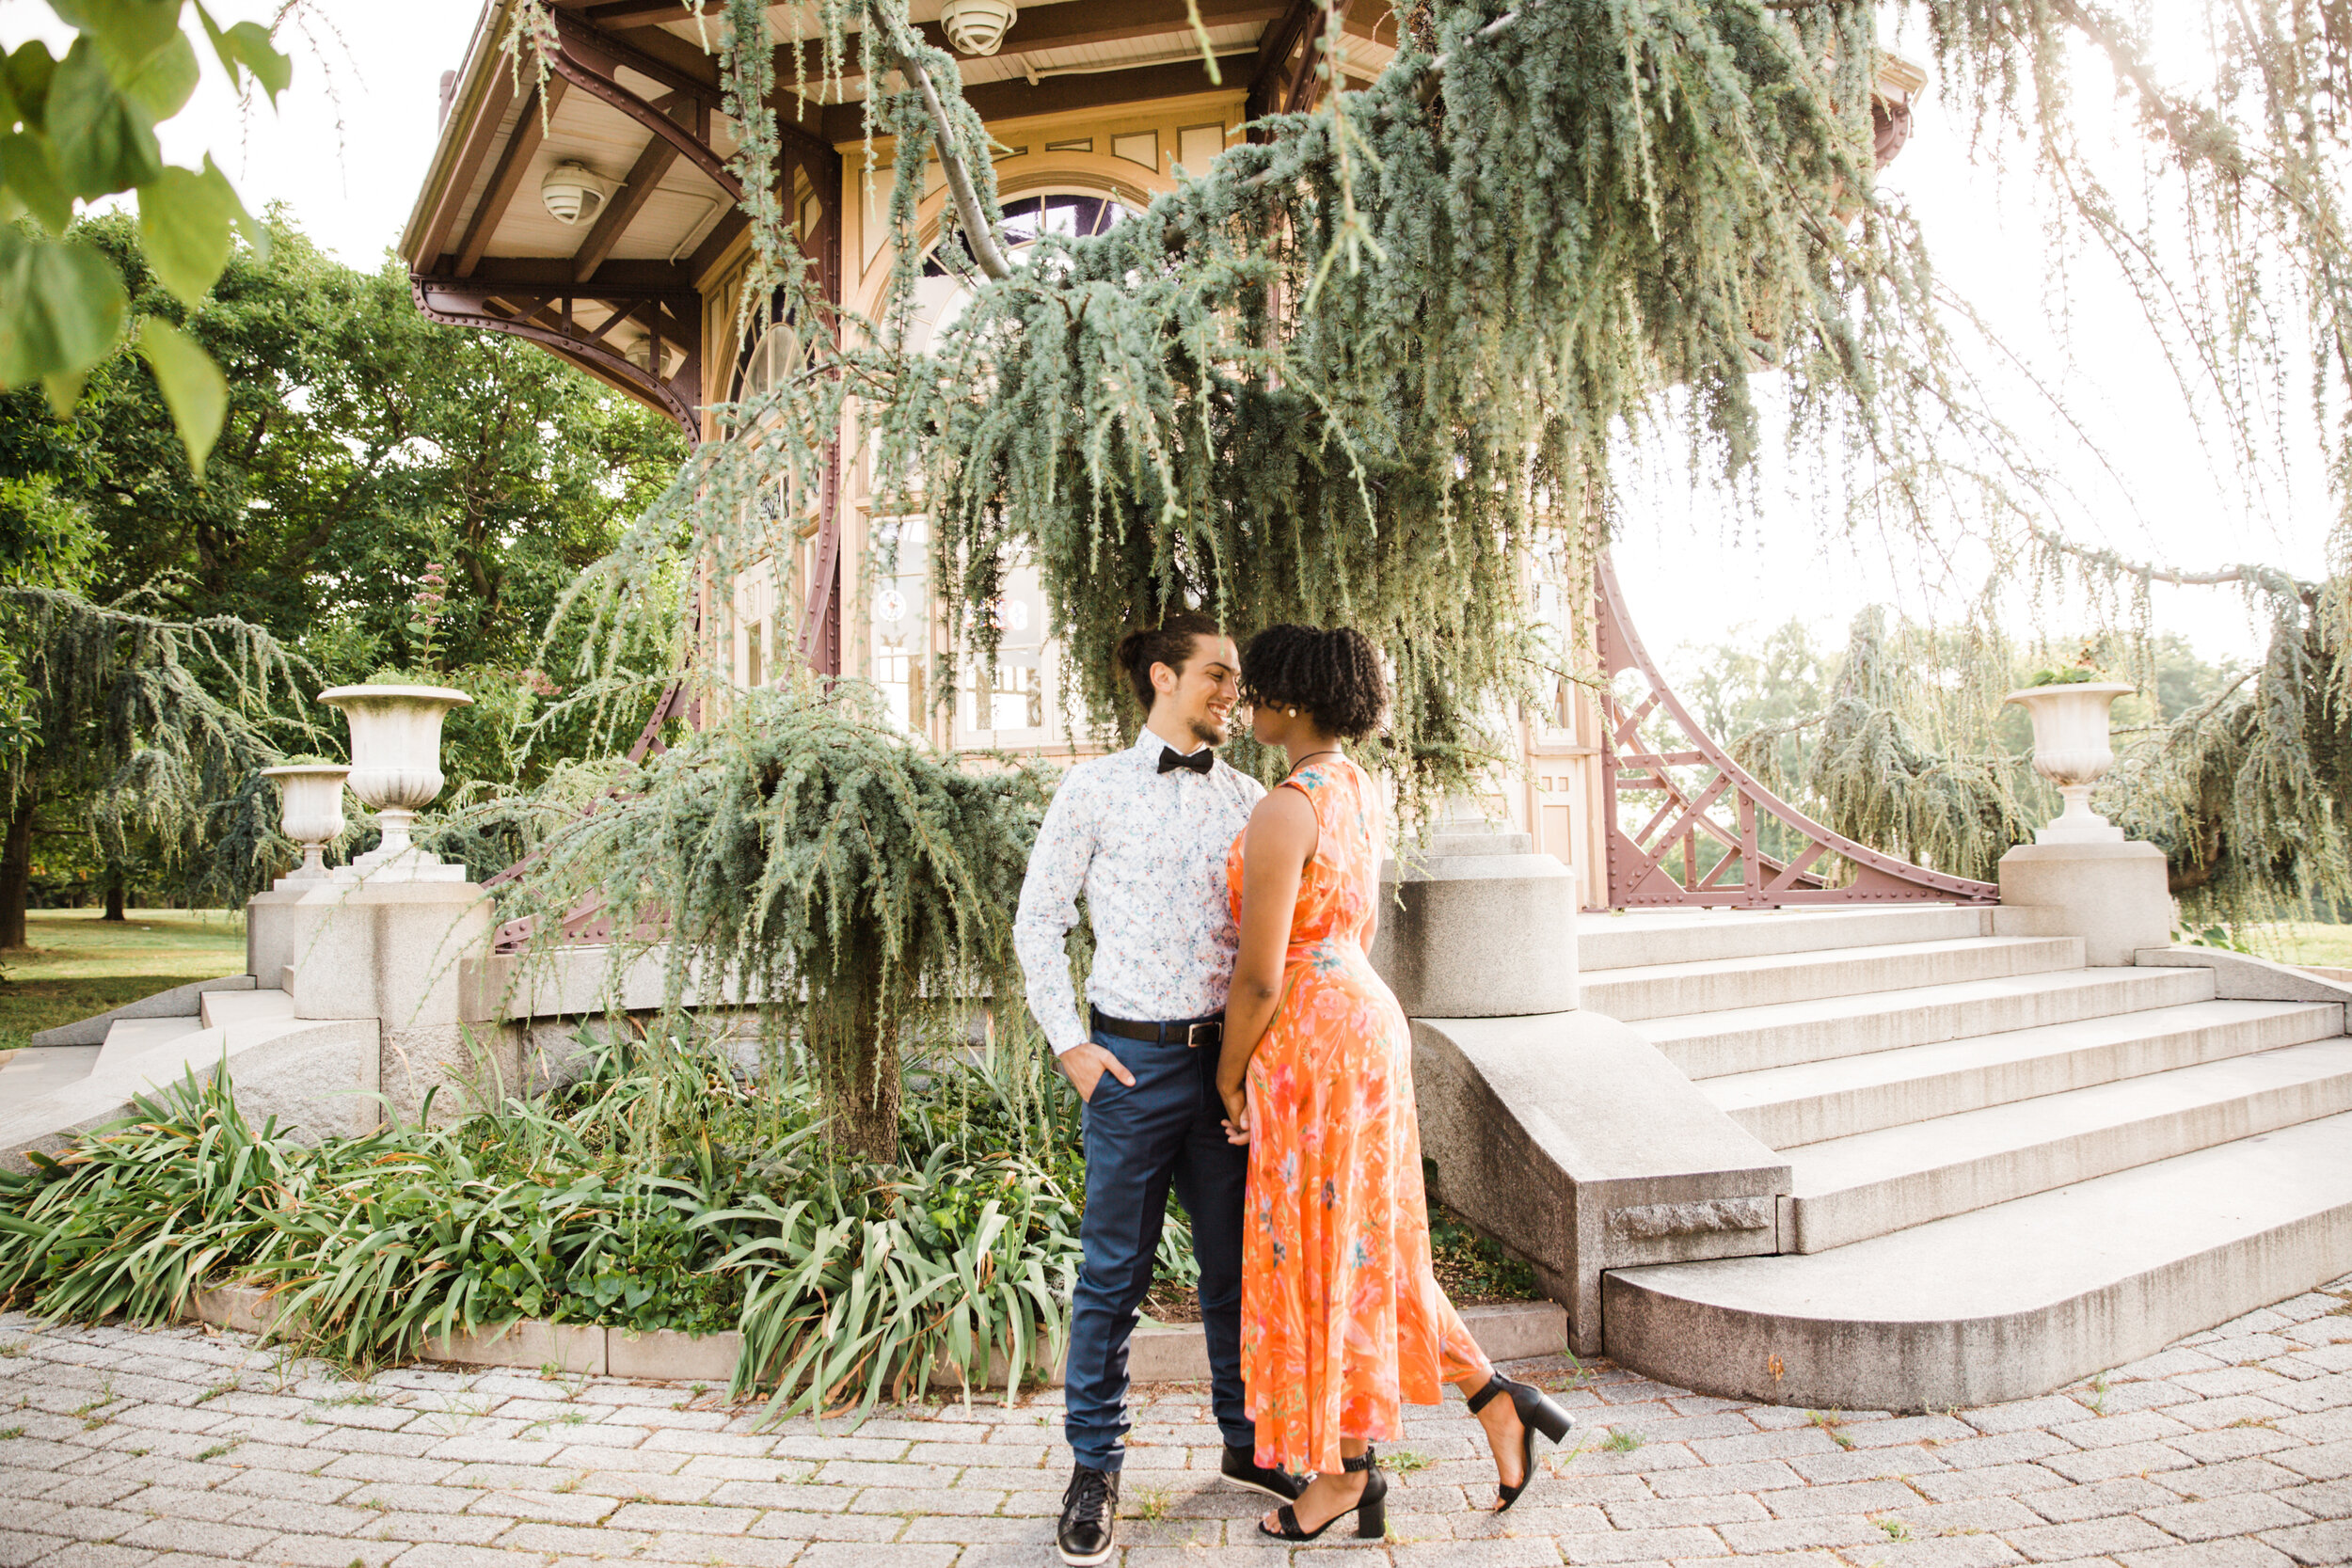 Golden Hour Engagement Session in Baltimore Maryland Patterson Park Pagoda DC Wedding Photographers Megapixels Media Photography and Videography Mixed Couple Multiracial Bride and Groom-23.jpg